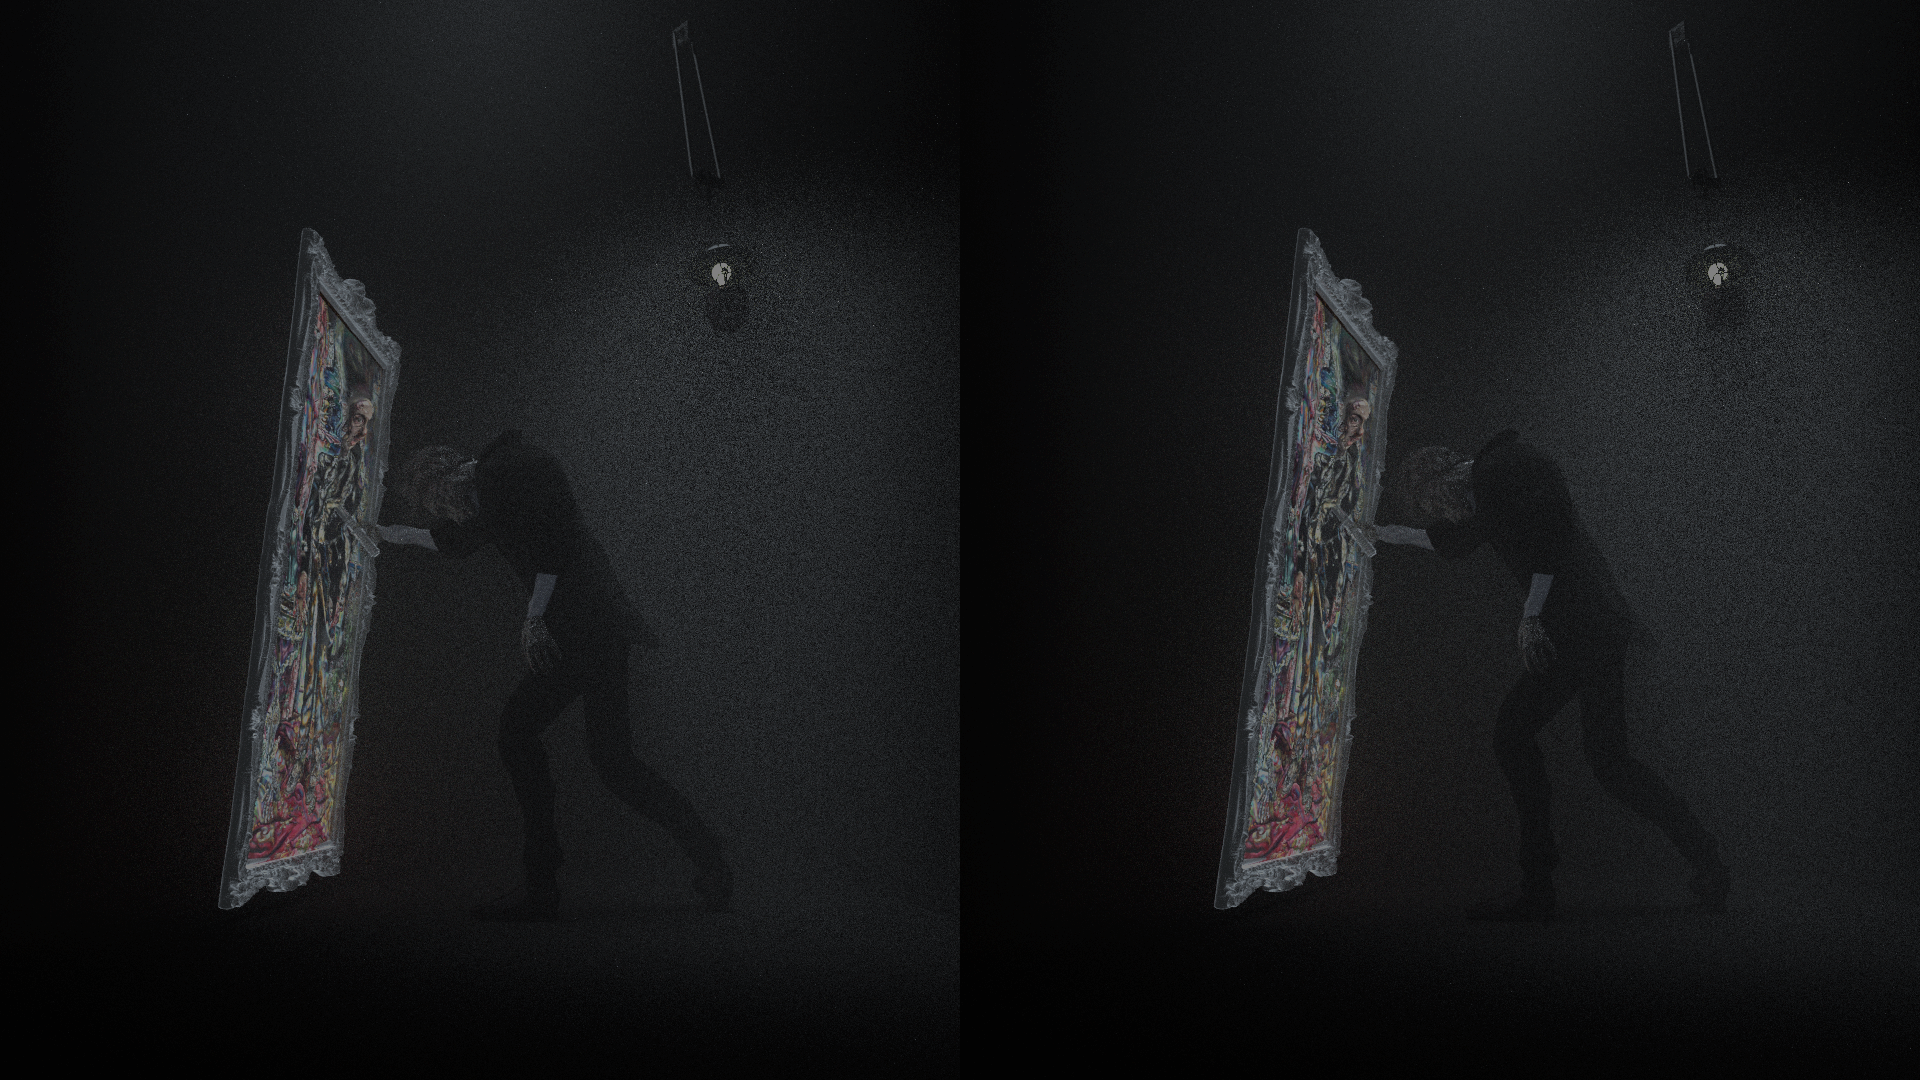 a still from a fixed vantage point virtual reality piece made in a 3D software called Blender and embedded in a wall and engulfed by thick black curtains. It uses a simple stereographic technology available as an attachment to a phone (I used the original Google Cardboard attachment). The installation serves as a peephole into a small virtual room lit only by a swaying gas lamp where Oscar Wilde’s infamous fictional character Dorian Gray, known for trading his mortality with a portrait of himself, slowly and pathetically stabs at the painting, which, unmarred by the attempts, envelops the knife and ripples in response. The stereoscopic video is on loop. The audio heard faintly from within the room is a song called “Goodbye Little Yellow Bird” sung by the Angela Lansbury in the 1945 American film adaptation of the novel. The original portrait I sampled for this piece was also commissioned for the 1945 film and painted by Ivan Albright.